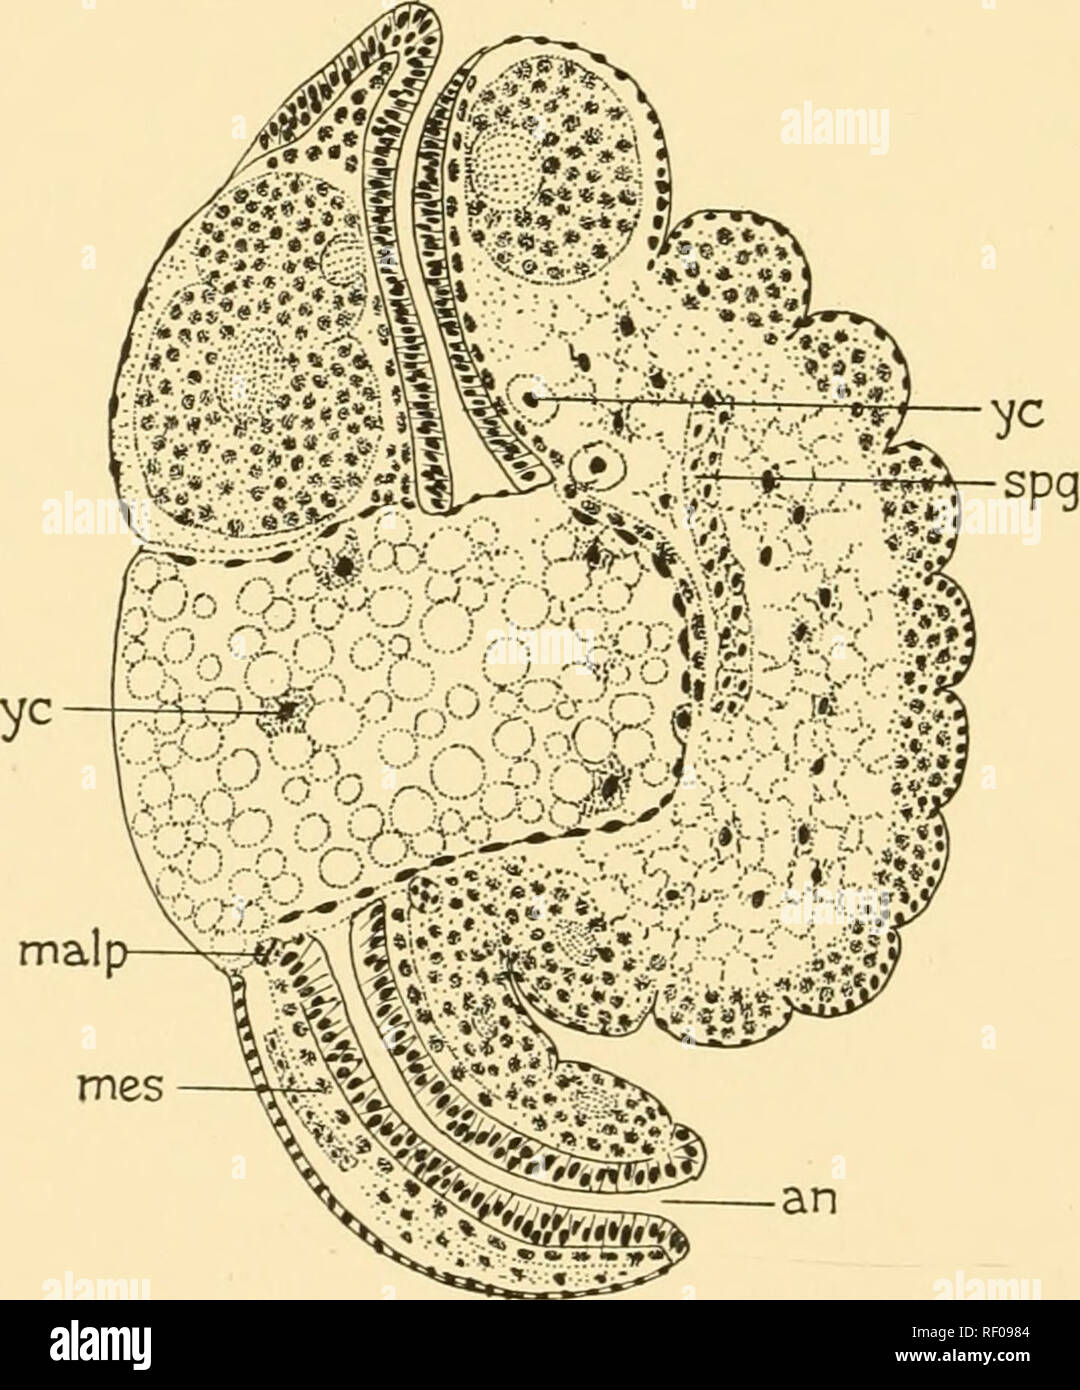 . Embryology of insects and myriapods; the developmental history of insects, centipedes, and millepedes from egg desposition [!] to hatching. Embryology -- Insects; Embryology -- Myriapoda. 336 EMBRYOLOGY OF INSECTS AND MYRIAPODS mesoderm follows it by a rapid growth along its lateral margins. When the lateral margins come in contact with the yolk, they are reflected backward and inward toward the median line, thus forming, on either Fig. 291.—Neophylax. Cross section of first abdominal segment, {ect) Ectoderm. (n) Connective of nerve cord. {som. m) Somatic mesoderm, {splm) Splanchnic meso- de Stock Photo